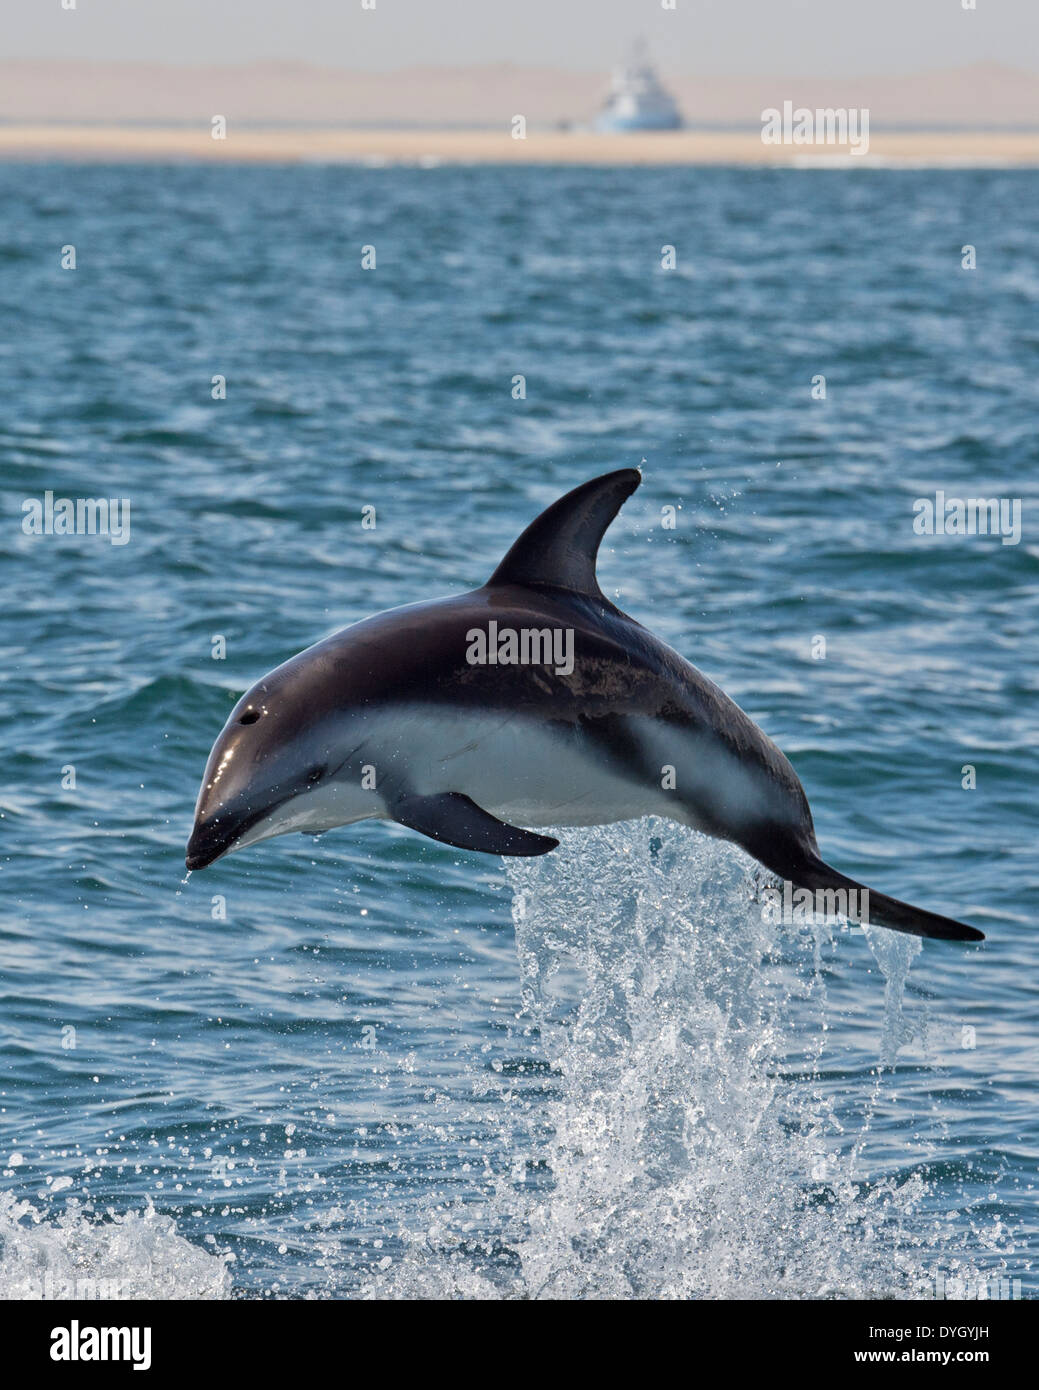 African Dusky dolphin (Lagenorhynchus obscurus obscurus). Jumping high into air with desert in background, Walvis Bay, Namibia. Stock Photo